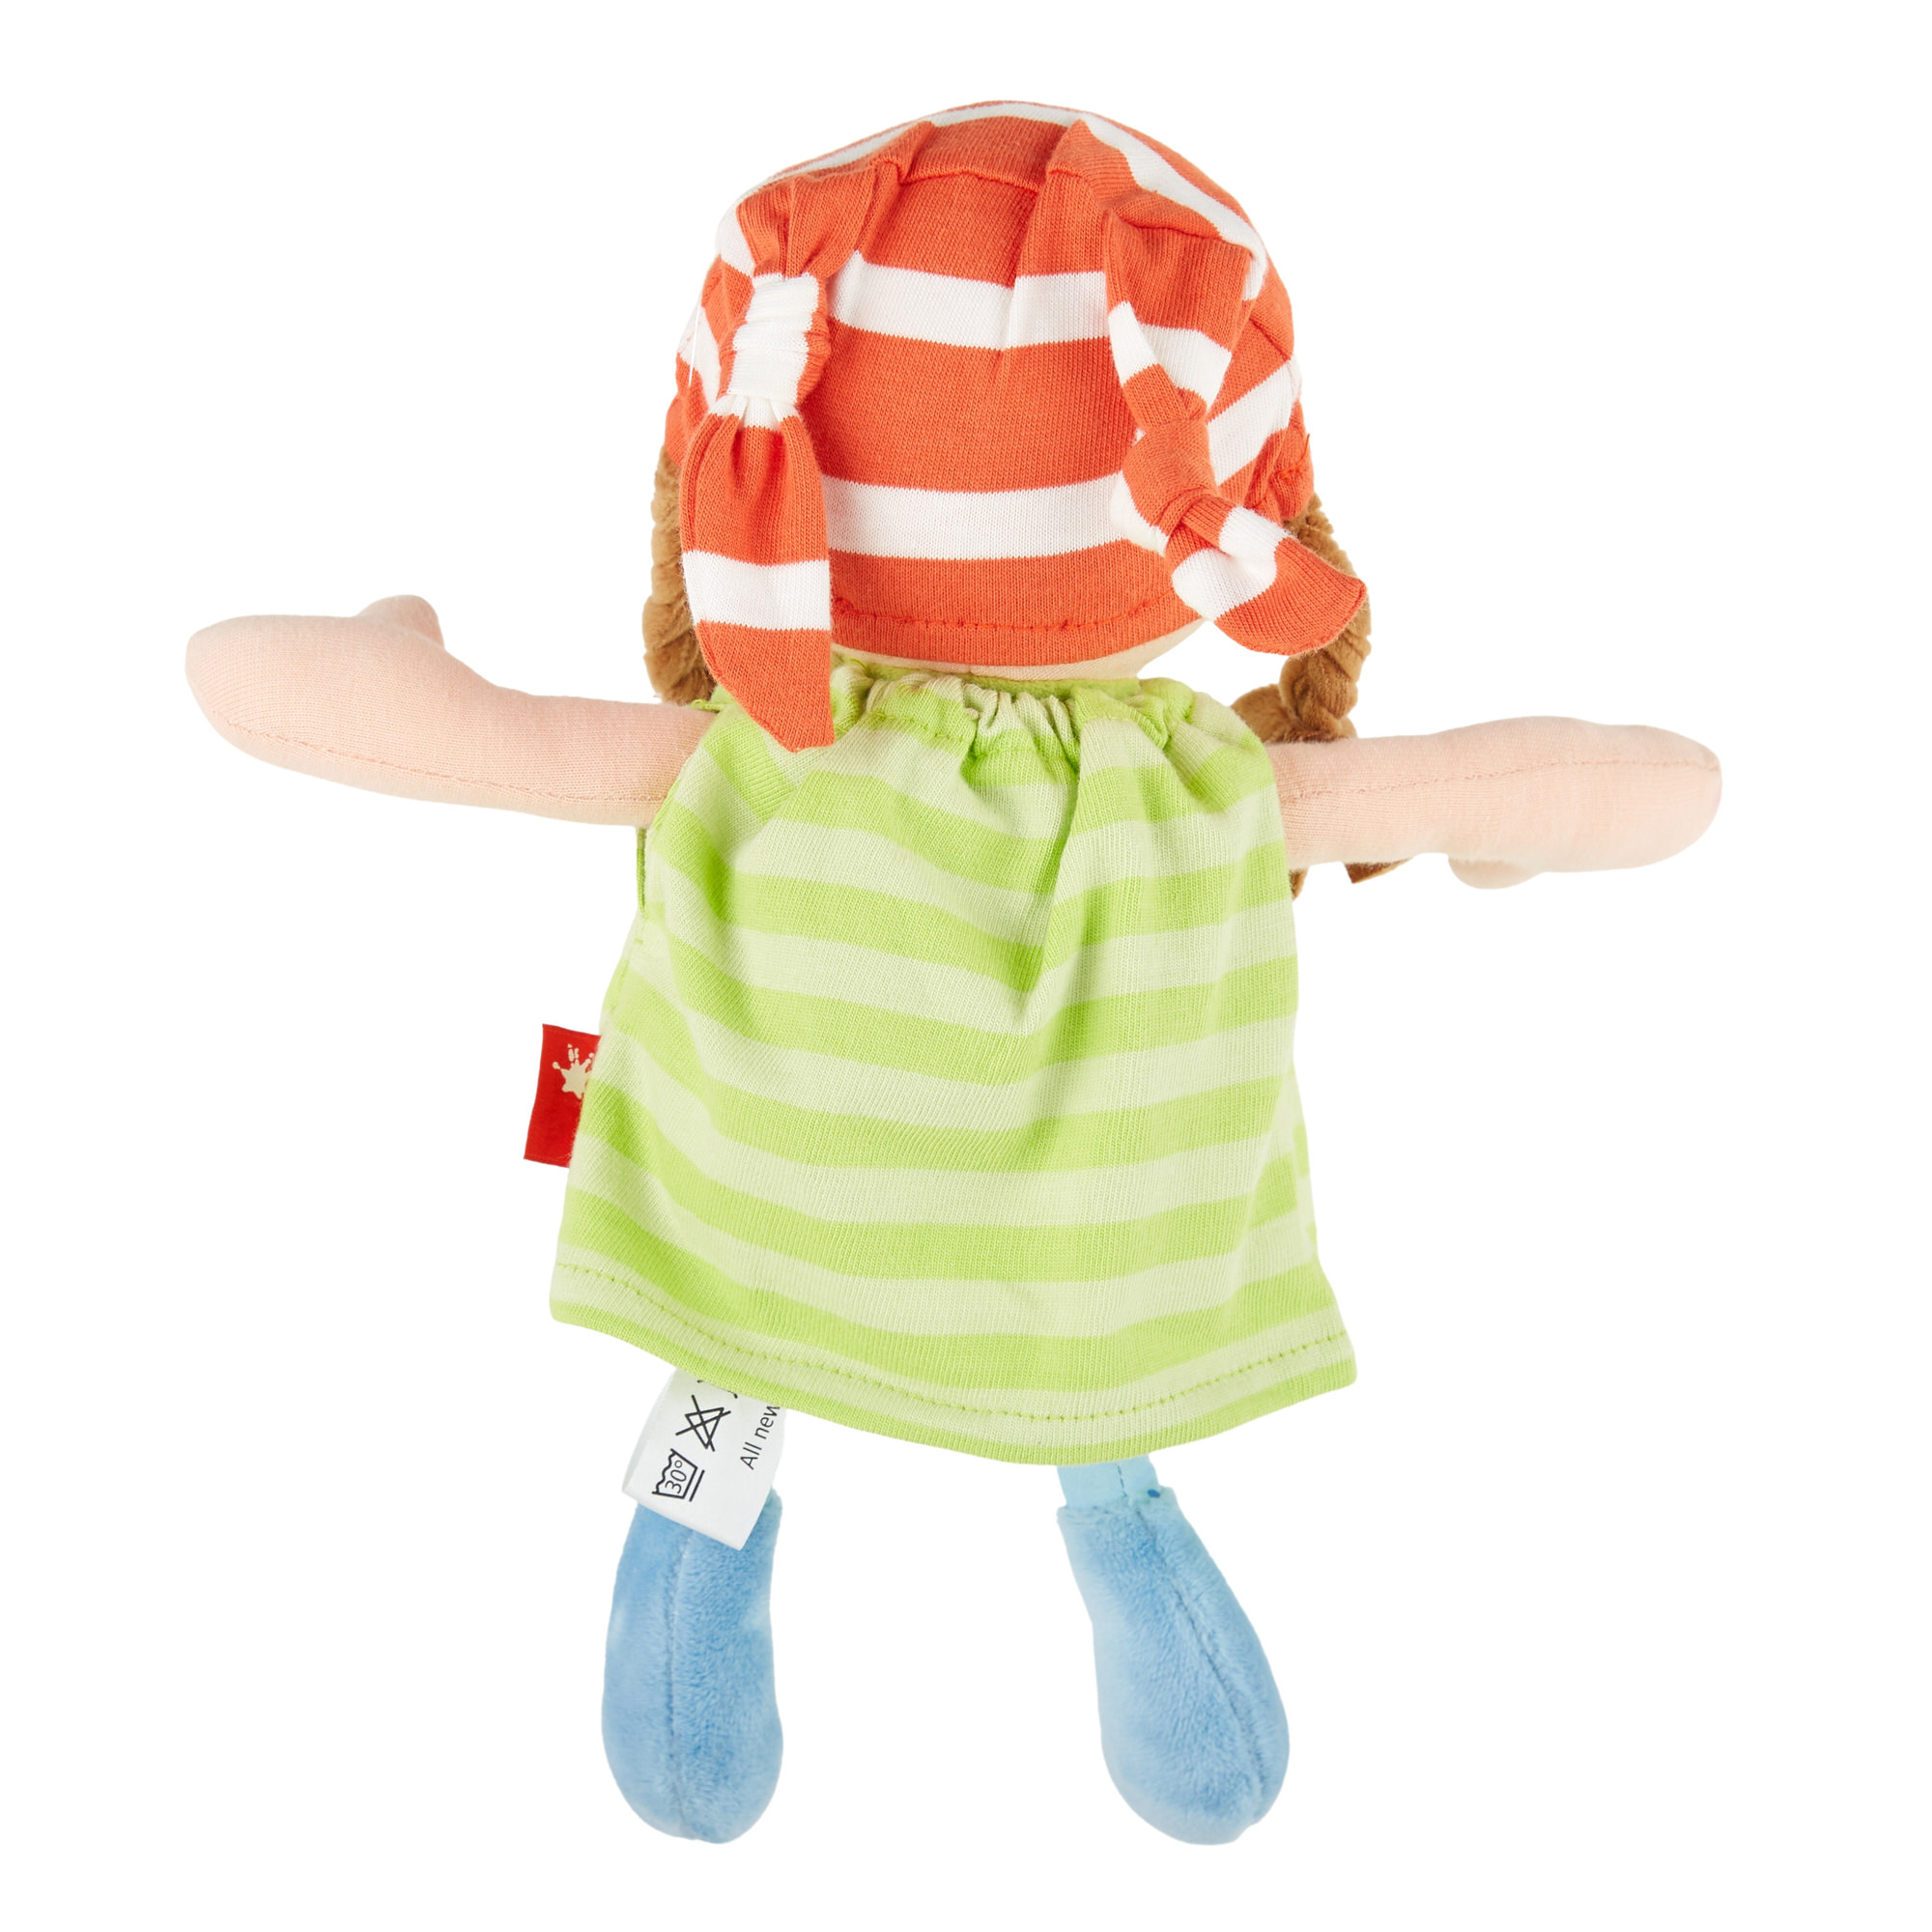 Soft doll for babies and toddlers, green